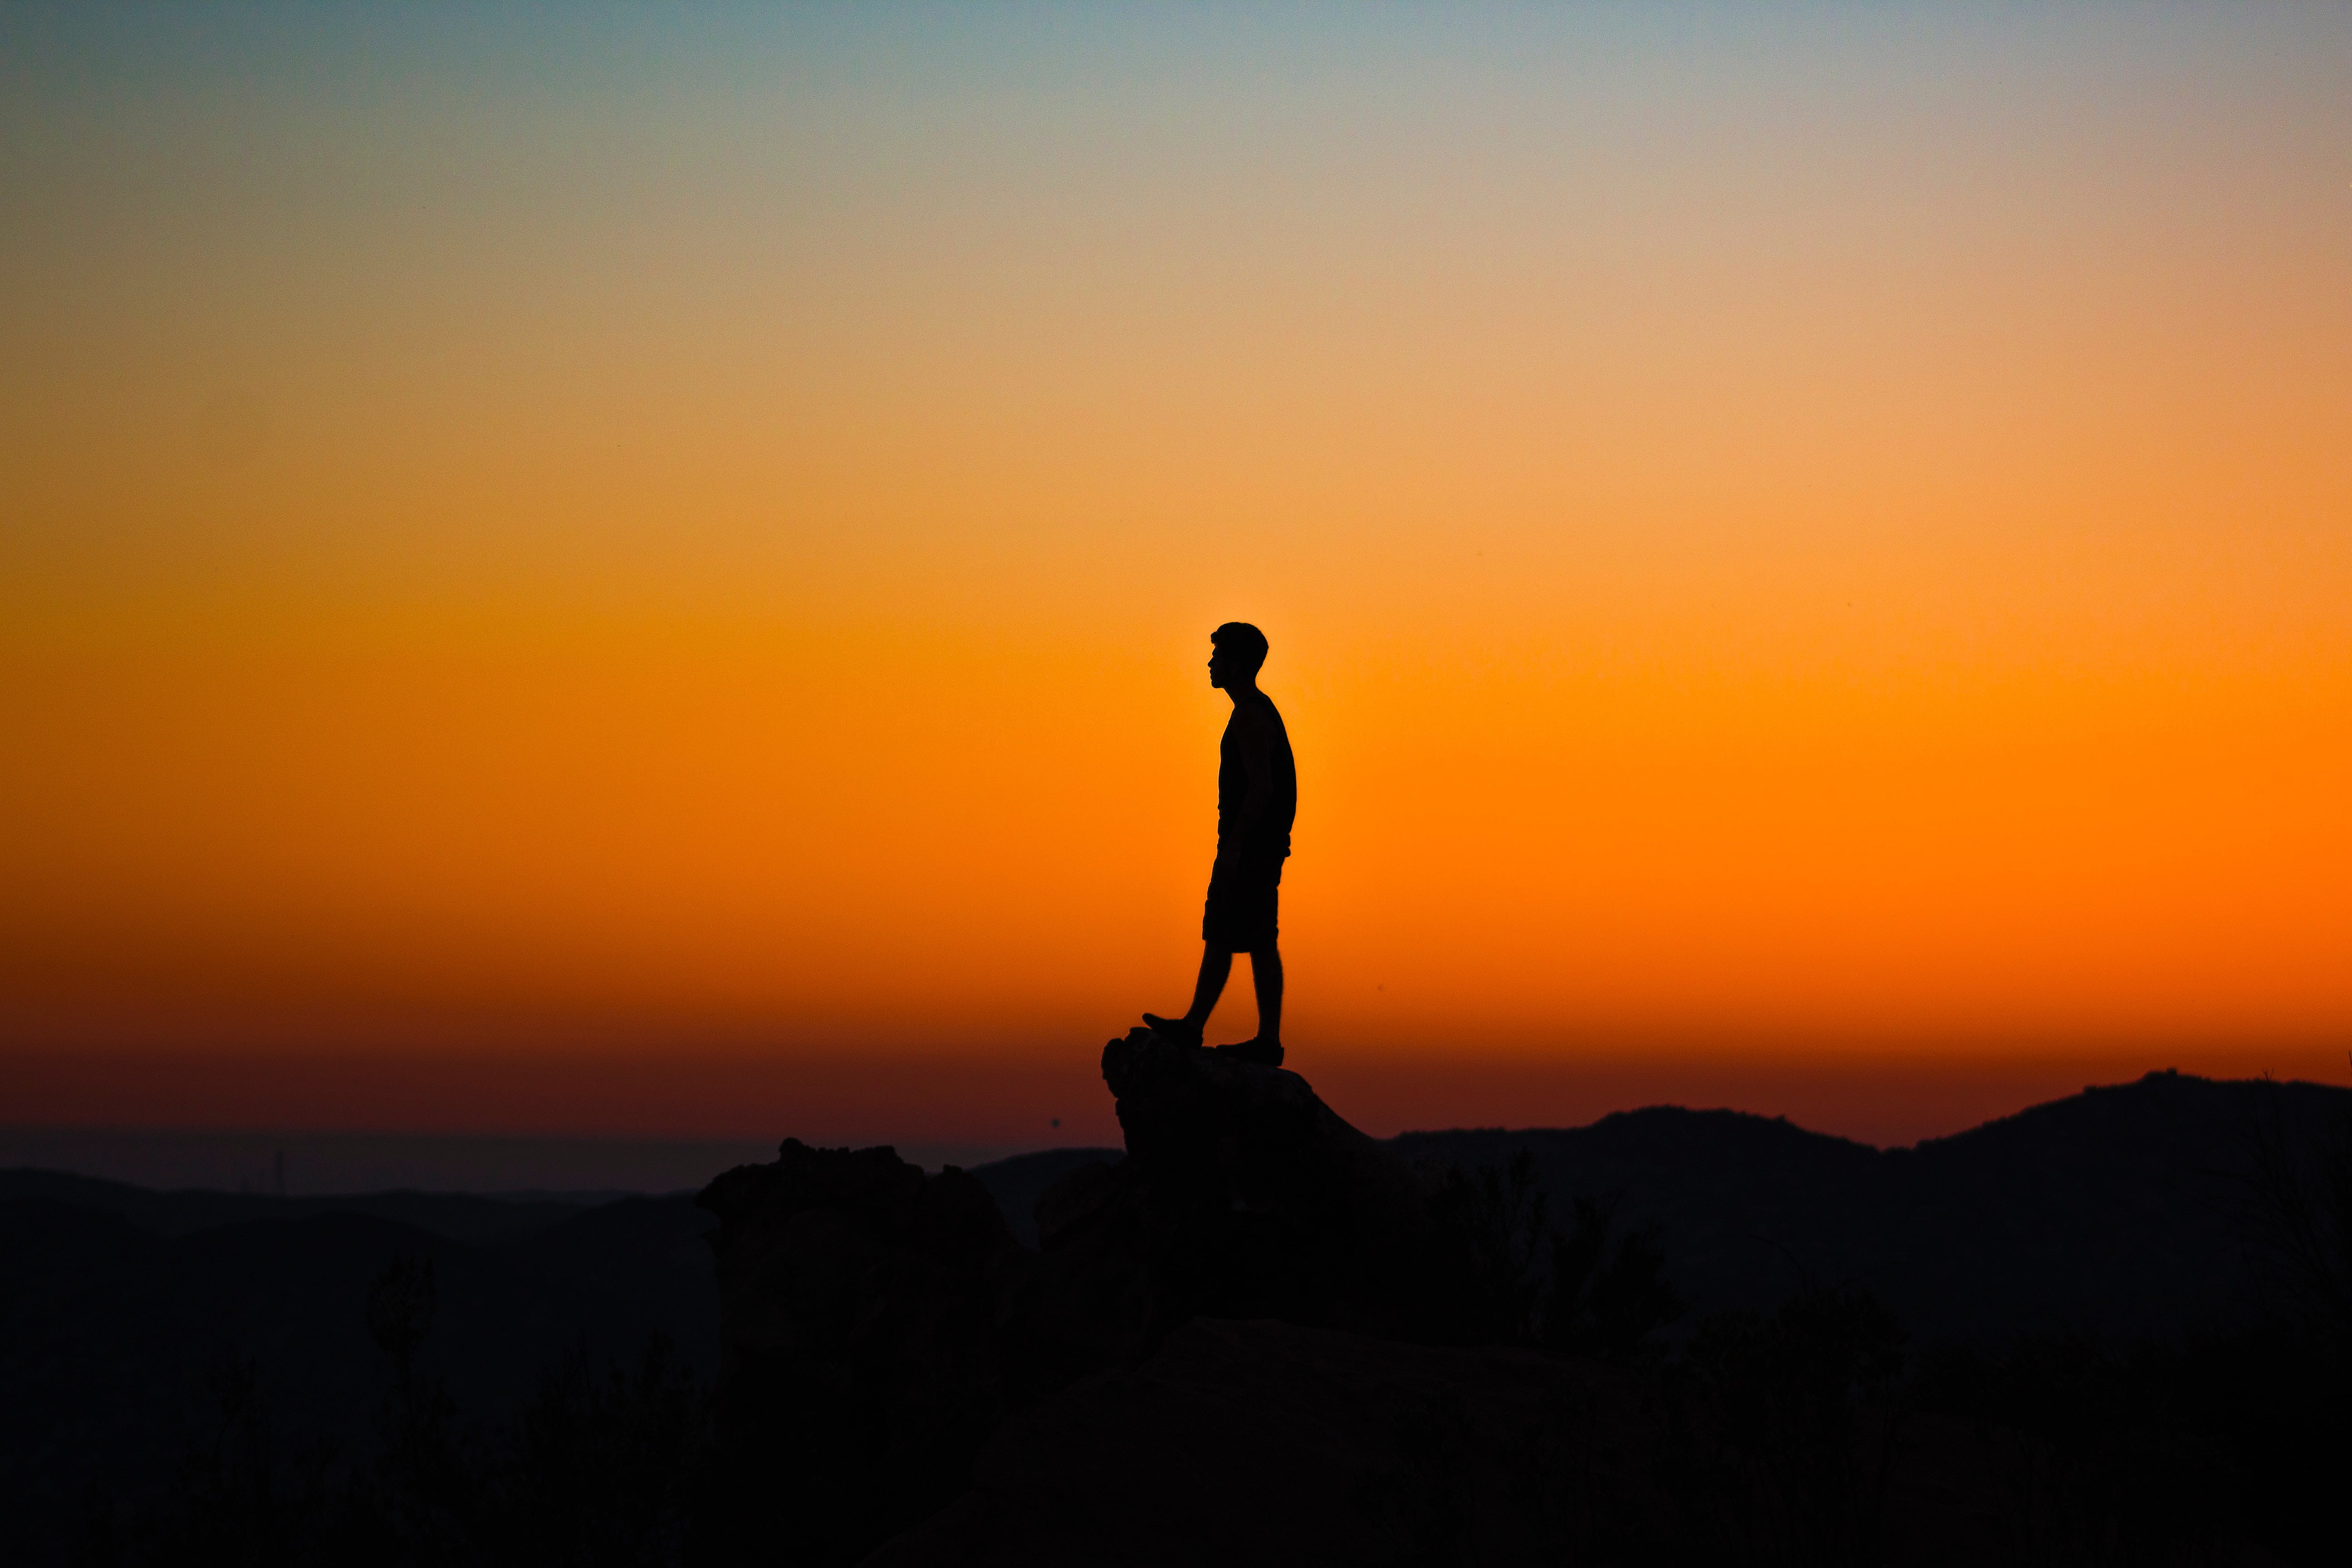 man on cliff silhouette photo, sky, sunset, outdoors, nature